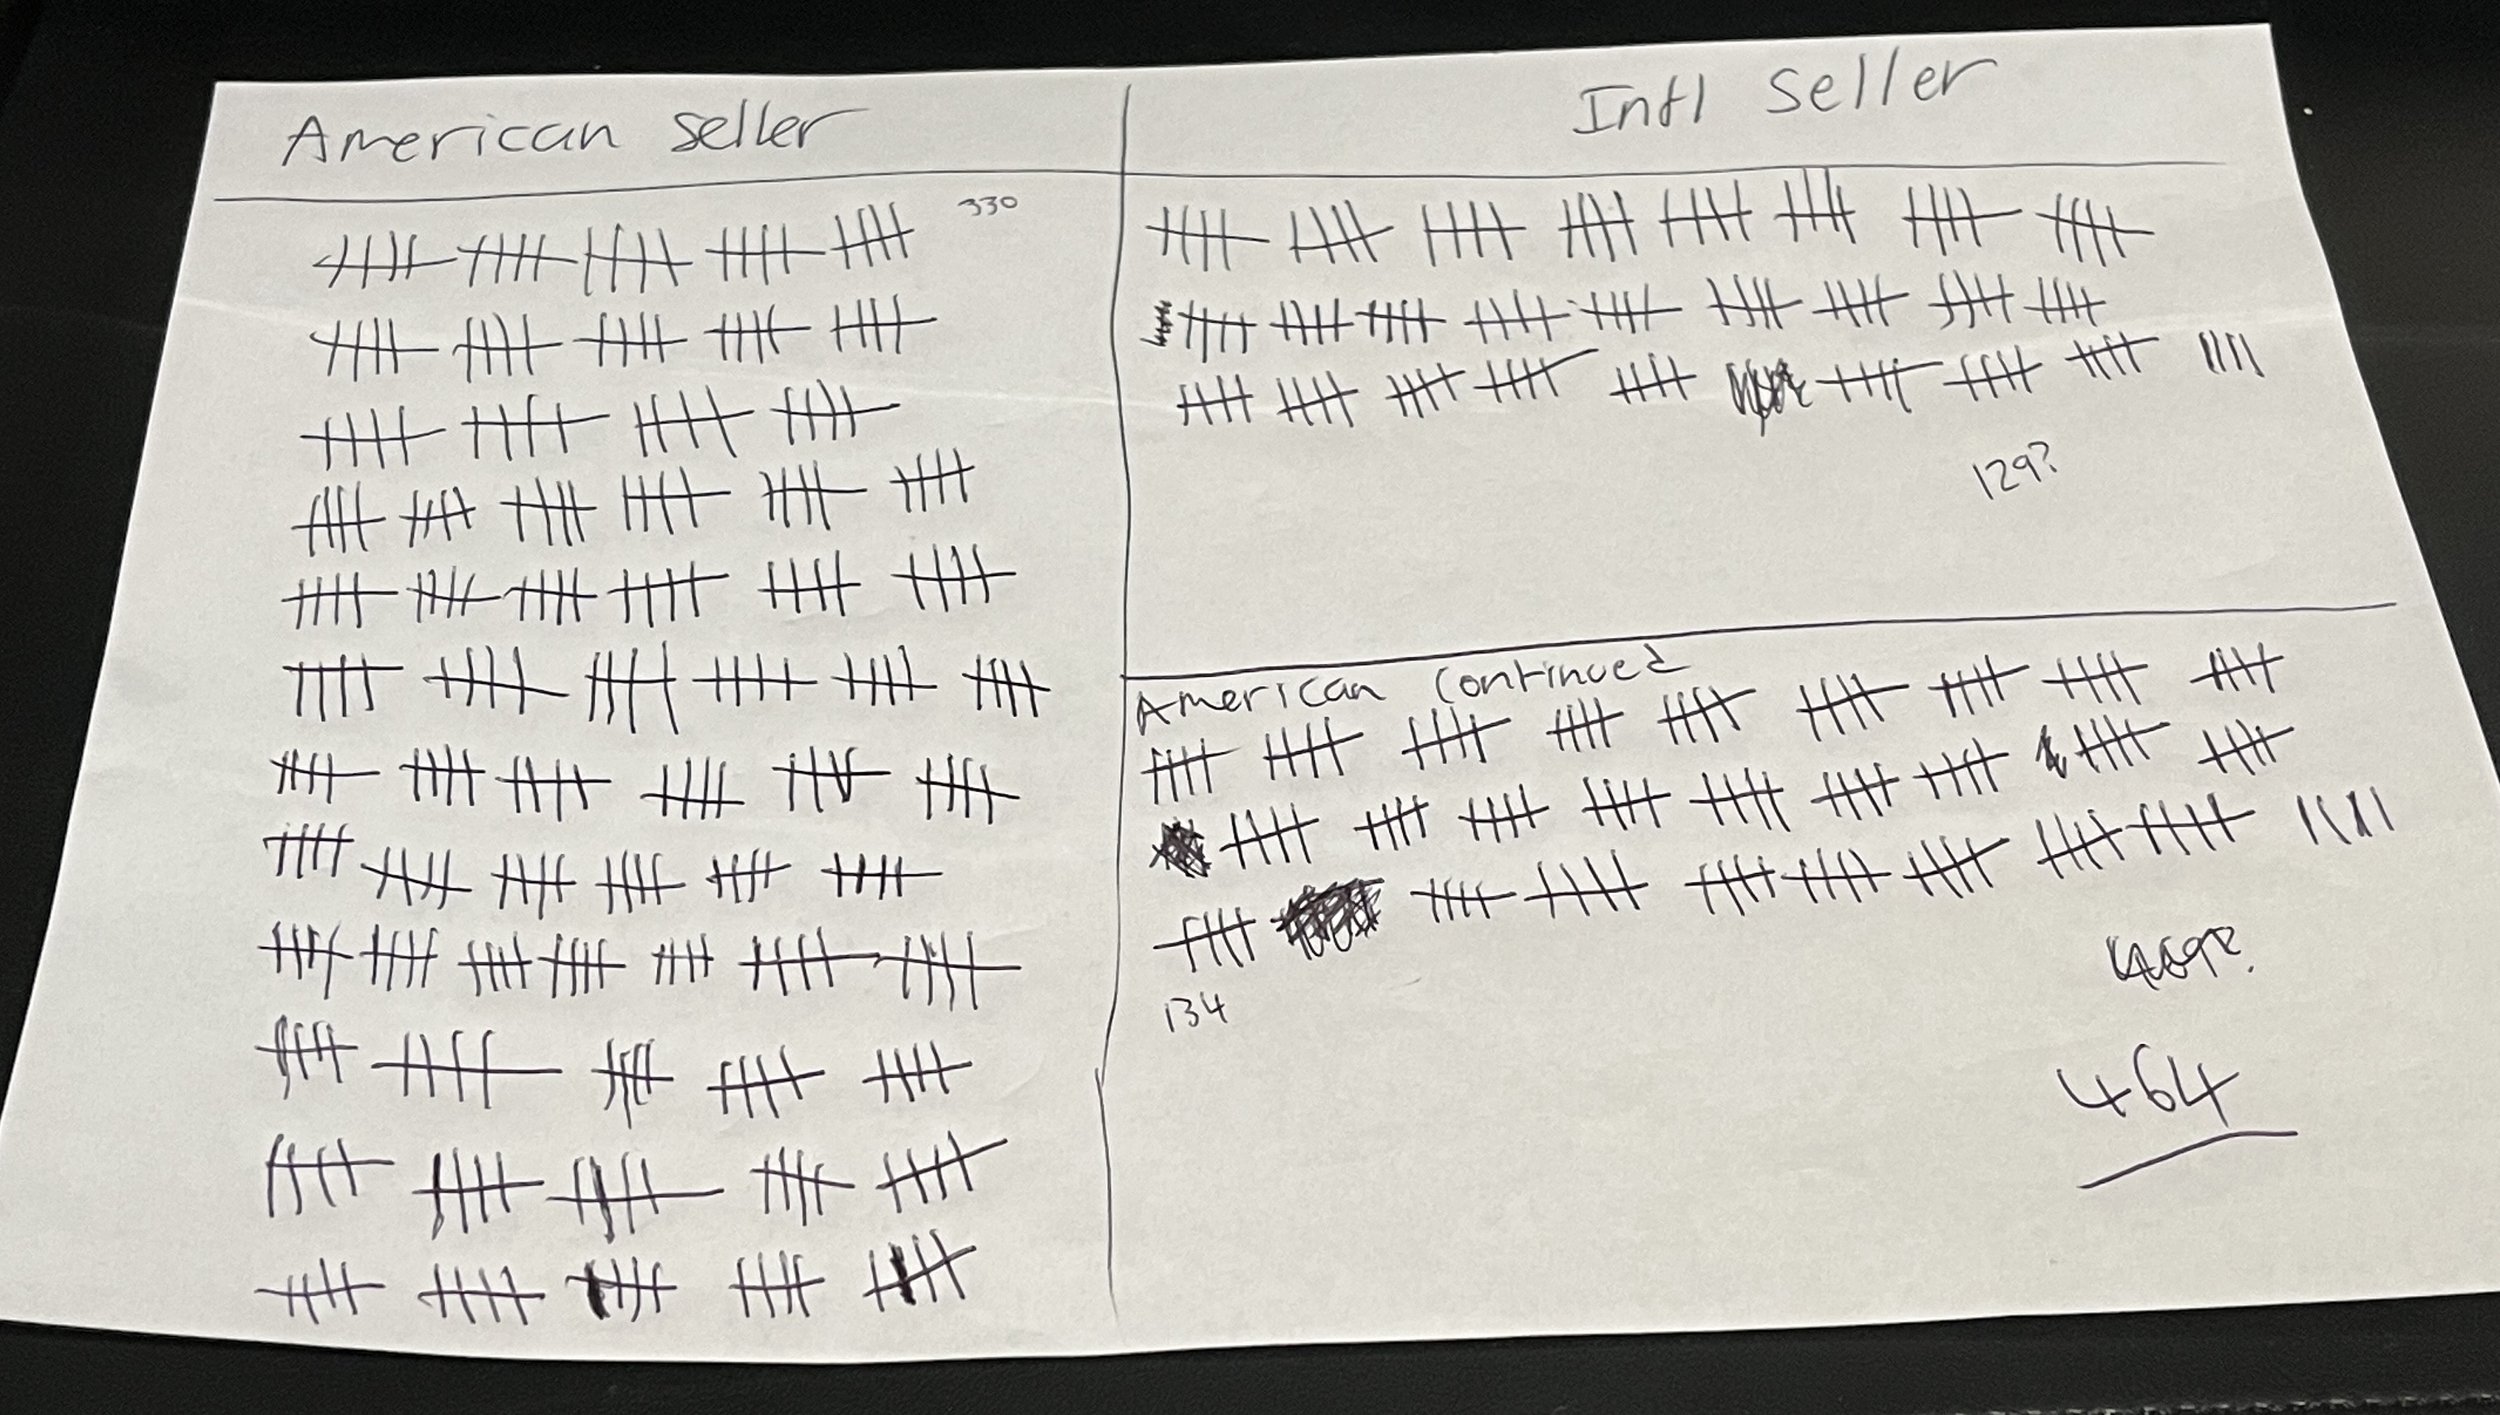   Image description: A photo of one of the sheets that I used to collect data; this one is of the seller’s location. There is one small segment for international sellers, and one massive segment with an overflow segment for American sellers.   As you